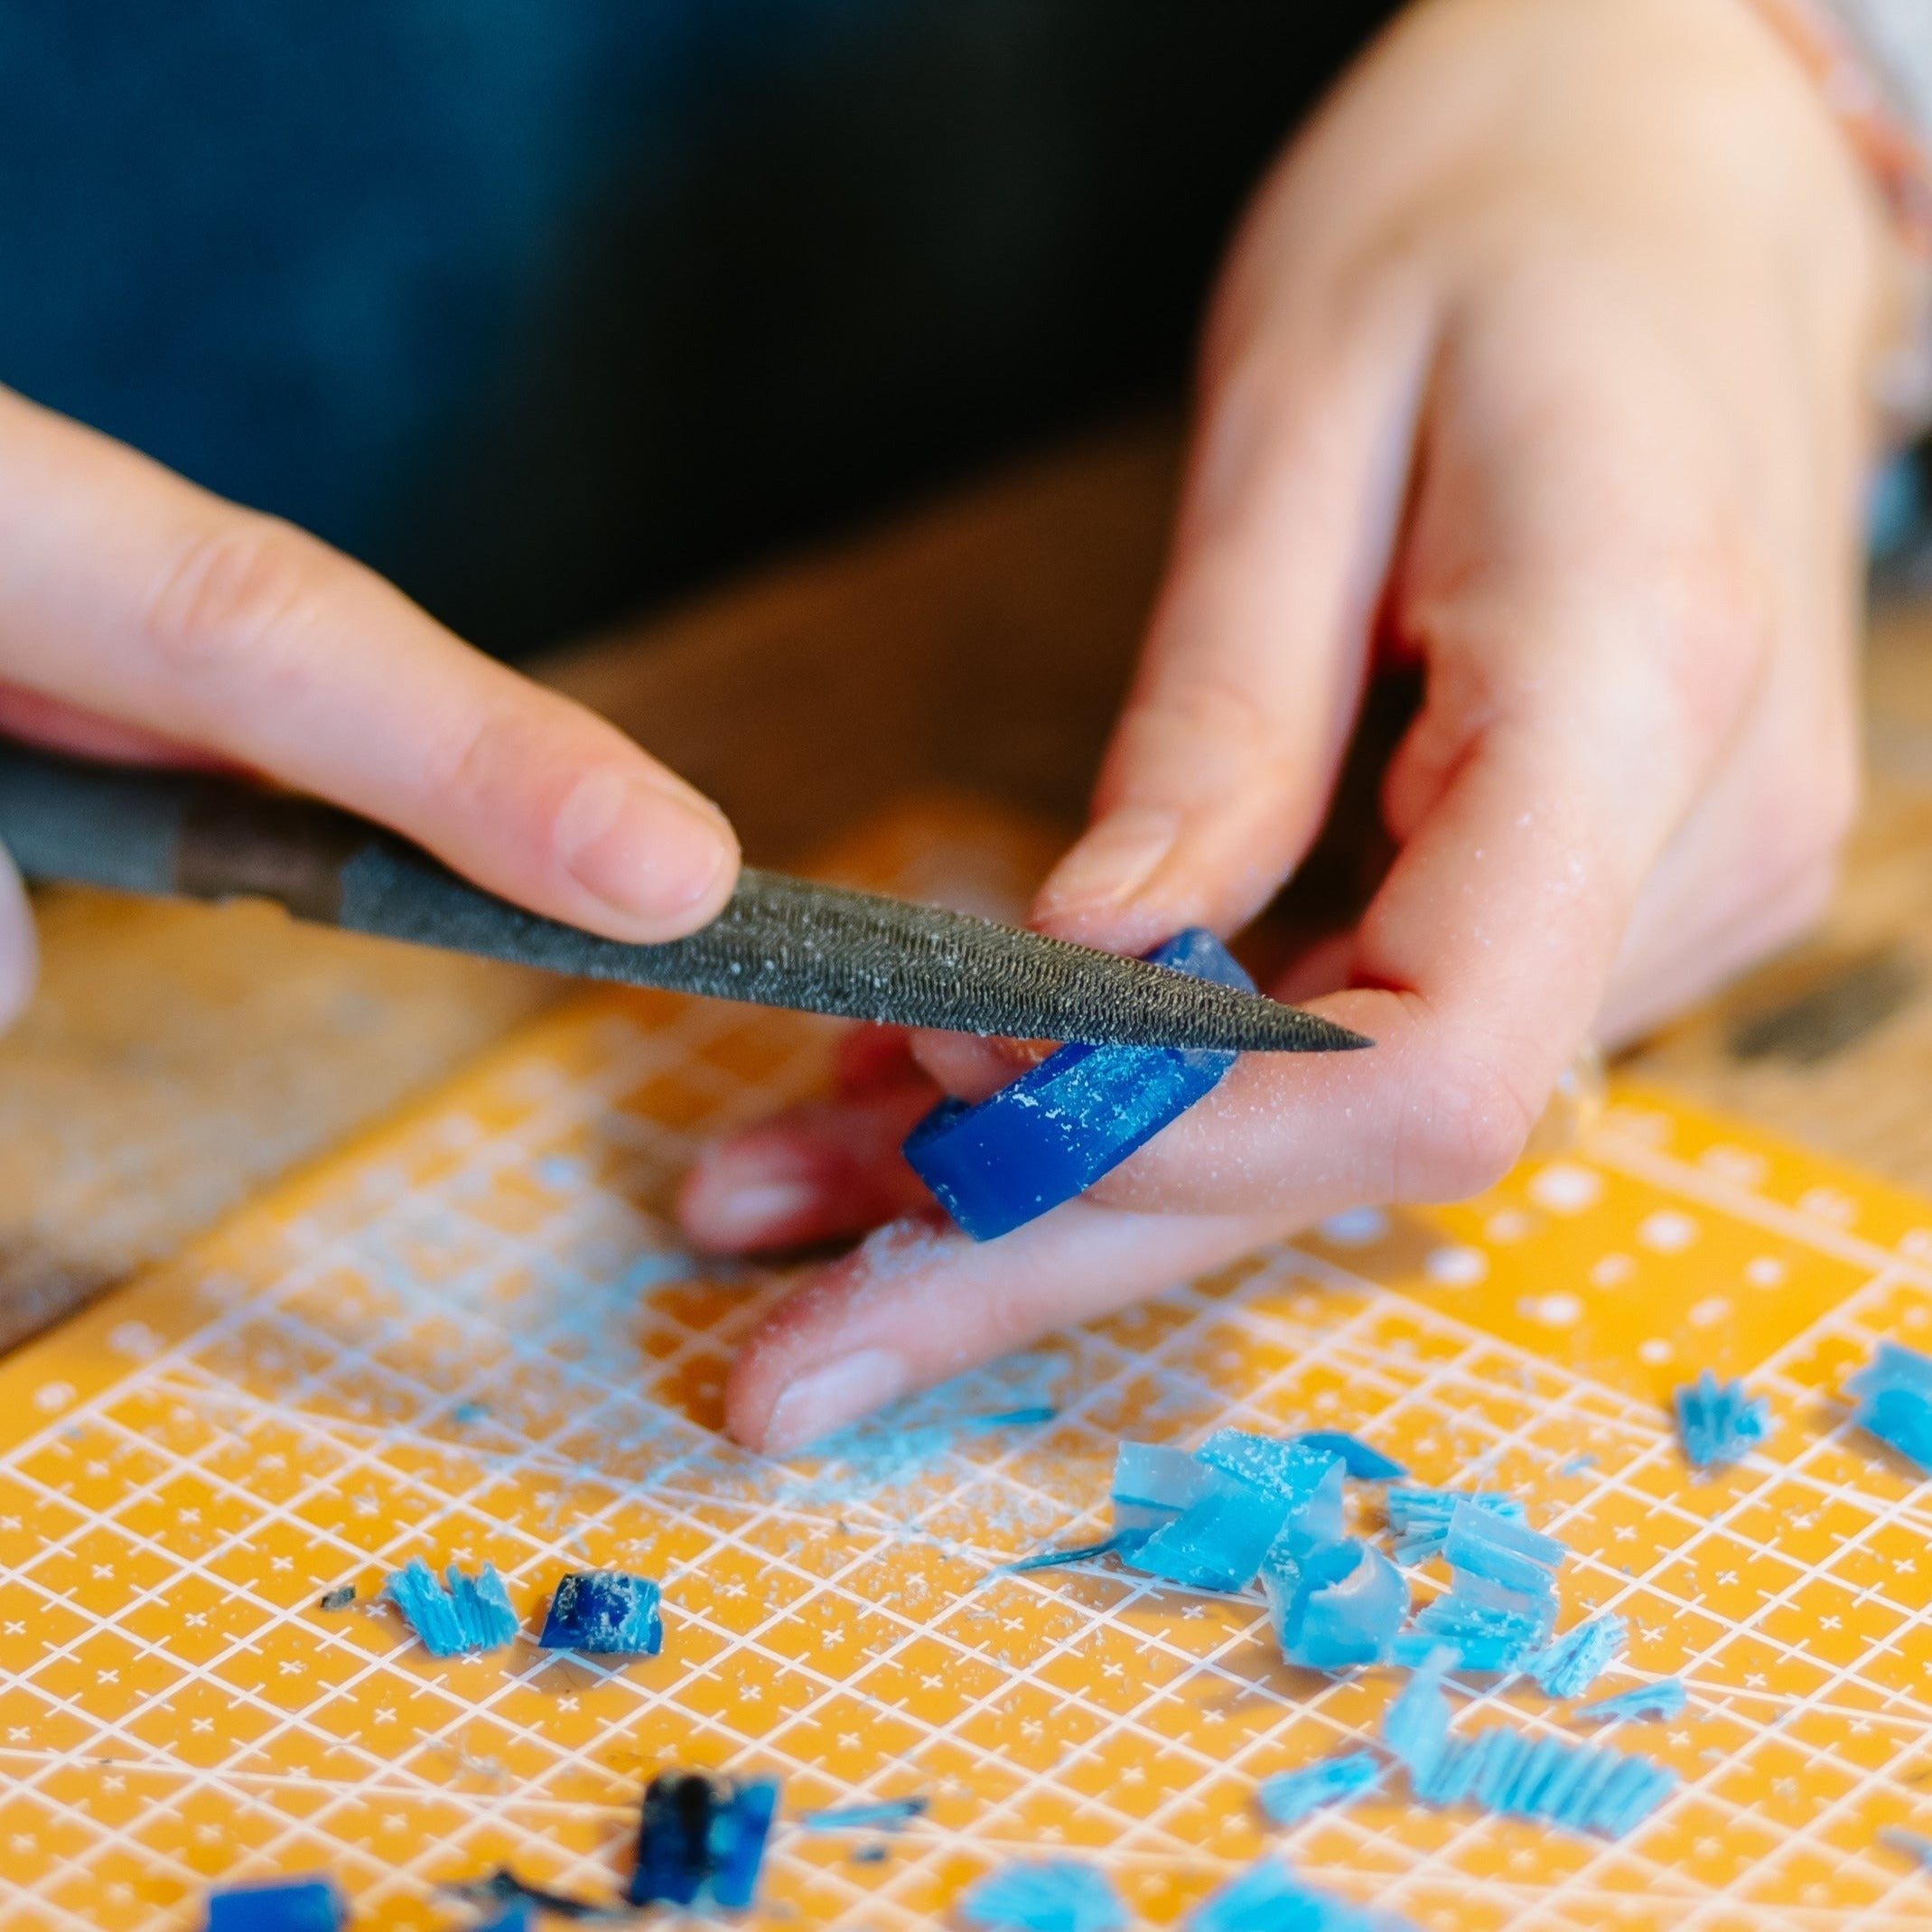 In this workshop you will learn how to create your own bespoke pendant through the art of lost wax casting. Explore mindfulness through creativity in a safe space where anything is possible.